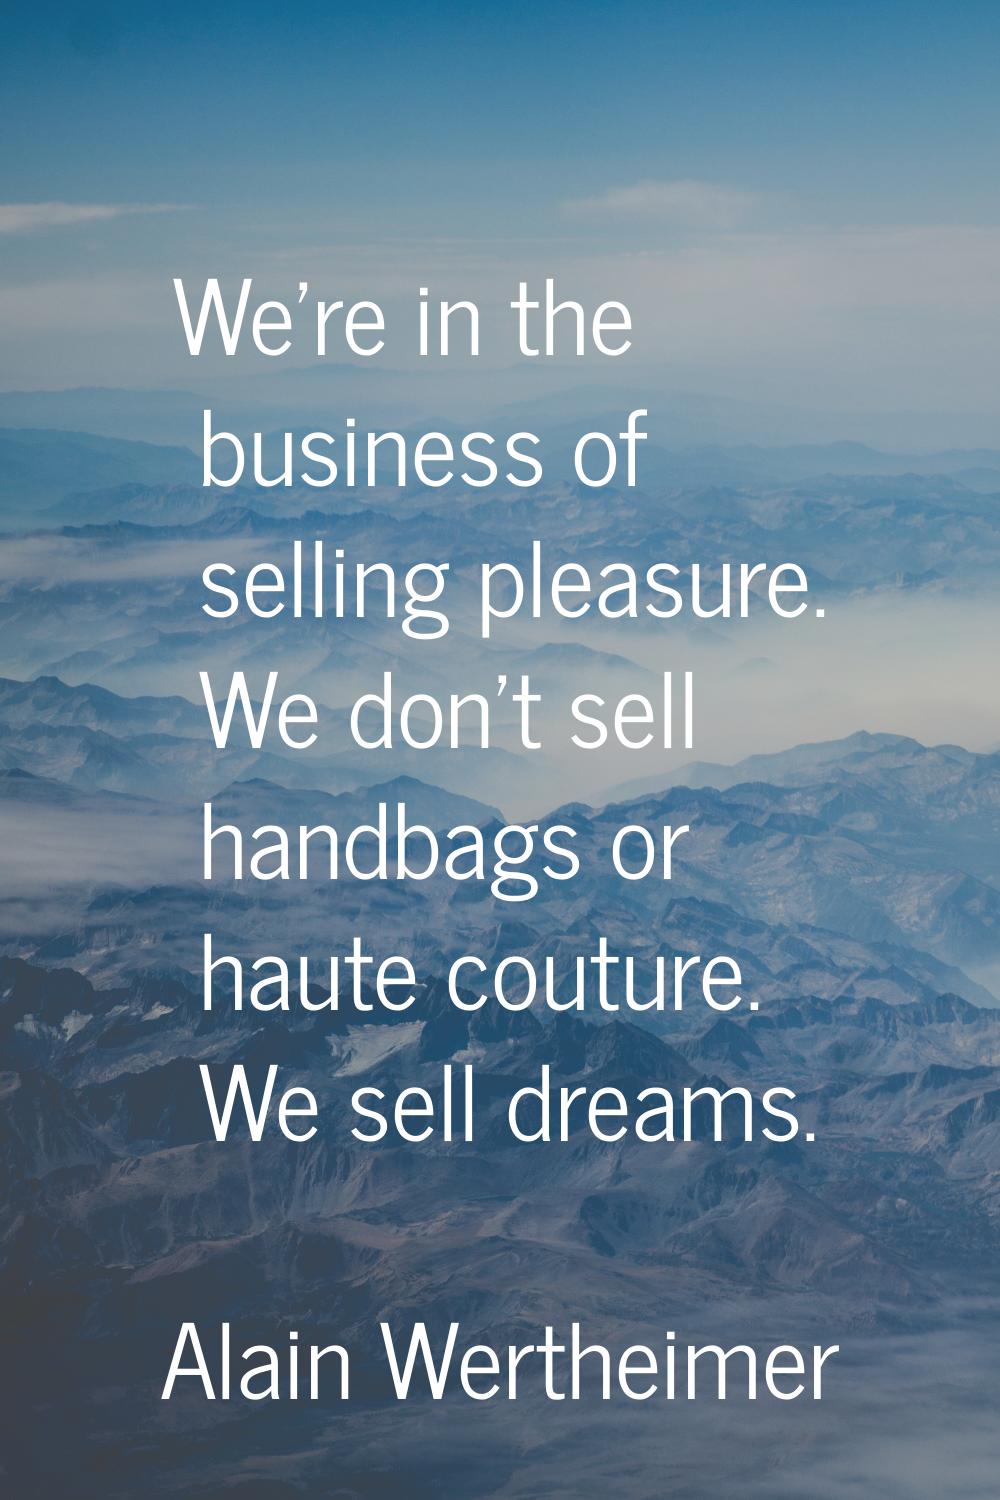 We're in the business of selling pleasure. We don't sell handbags or haute couture. We sell dreams.